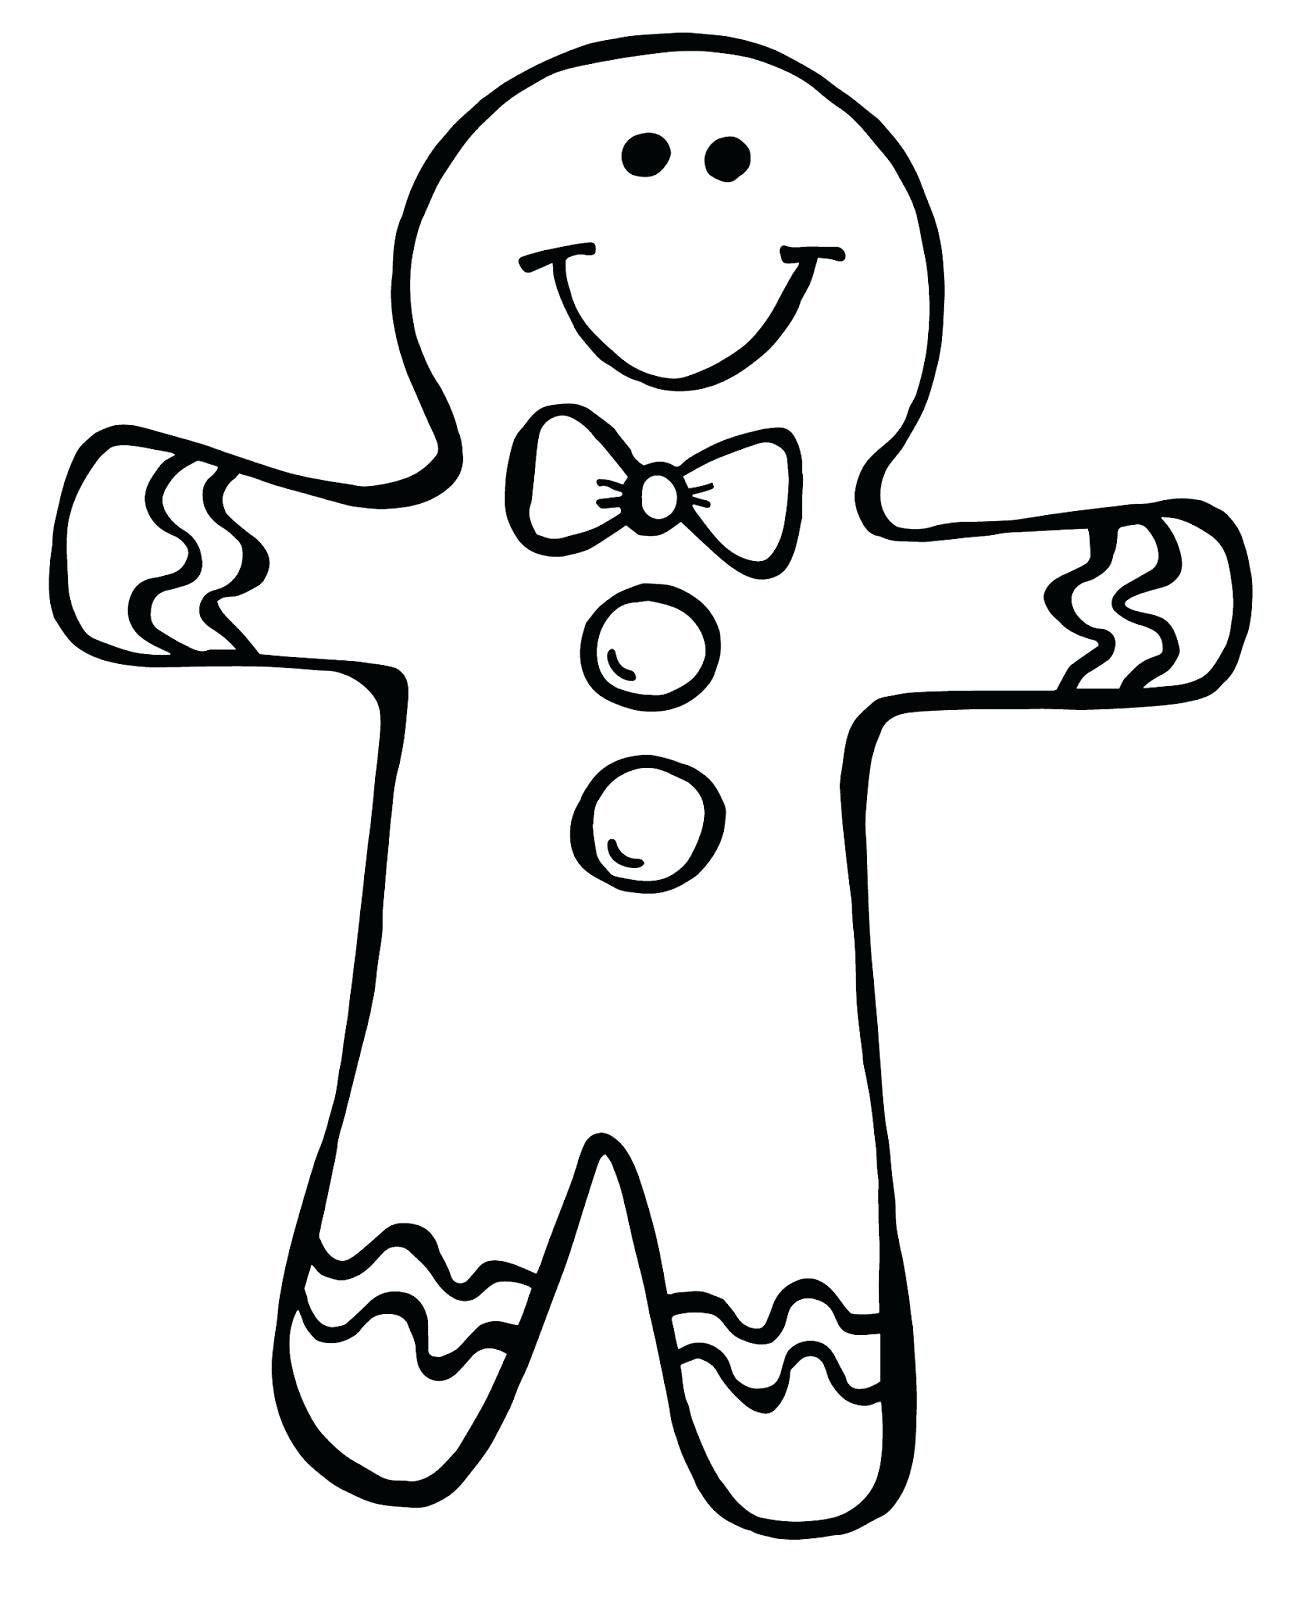 Gingerbread Man Coloring Page | Free download on ClipArtMag